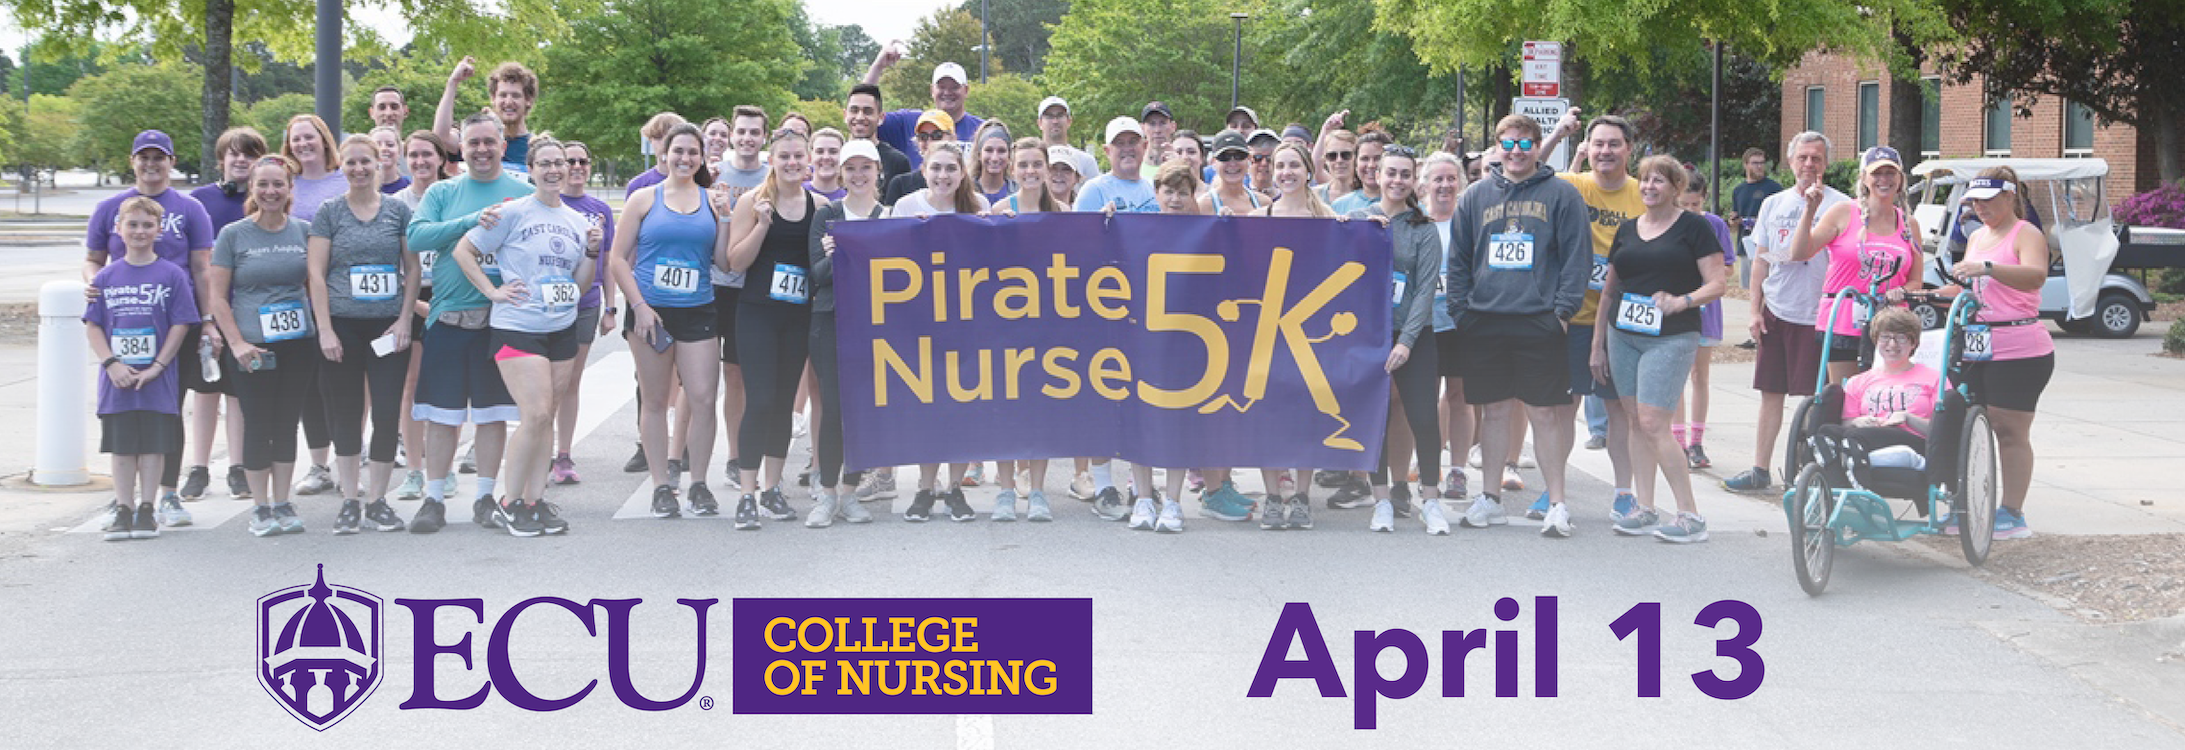 A group of people hold a banner during the 2023 Pirate Nurse 5K race